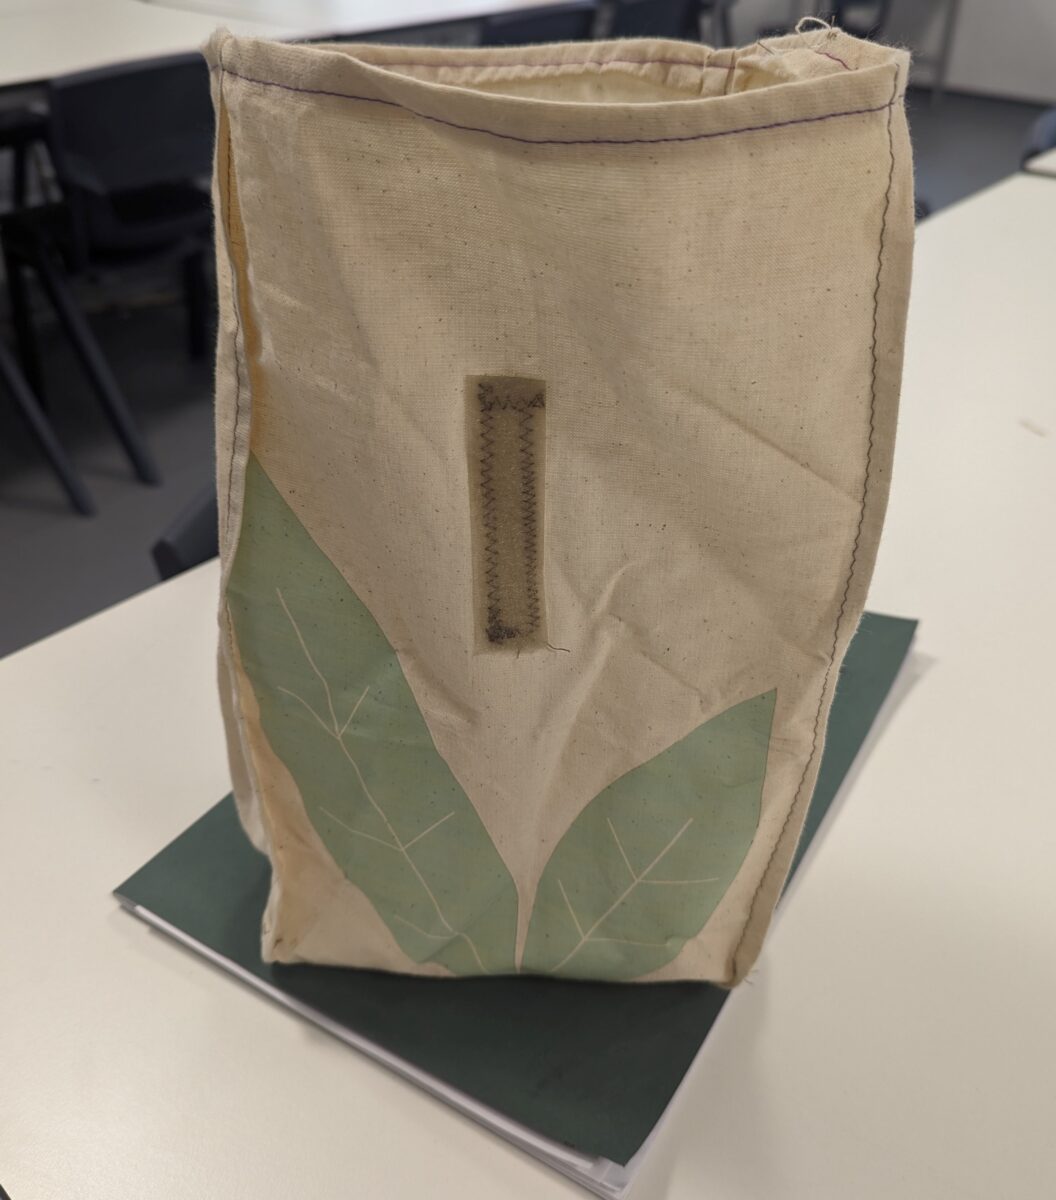 DT Year 8 Students Lunch Bag - a brown canvas bag with a green leaf and velcro sewed on